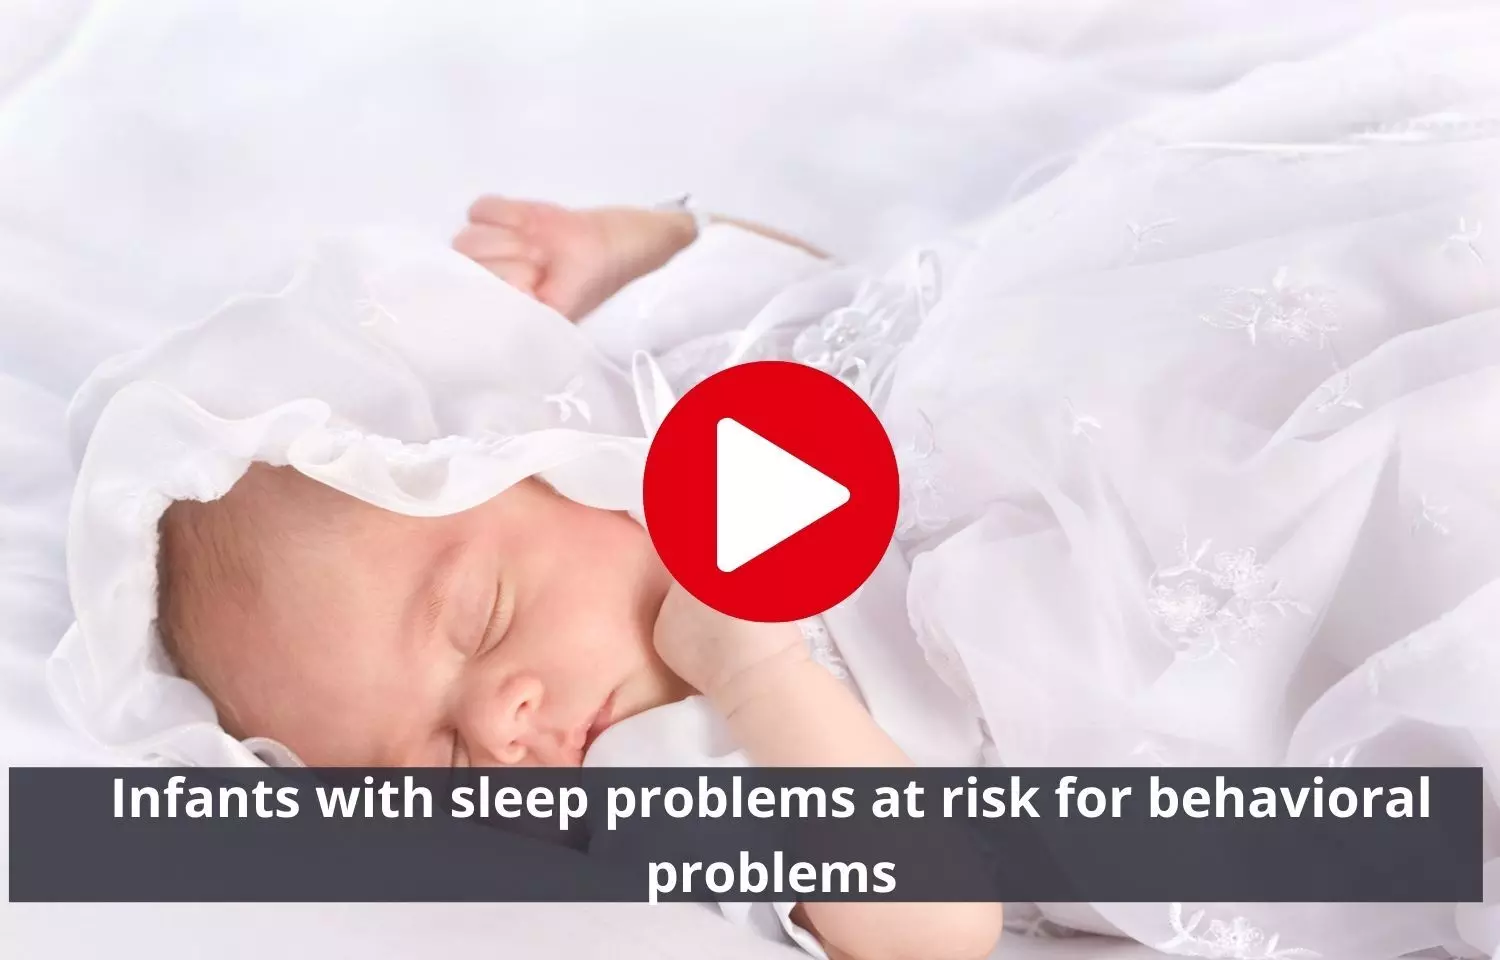 Infants with sleep disturbances at high risk of behavioral problems later in life